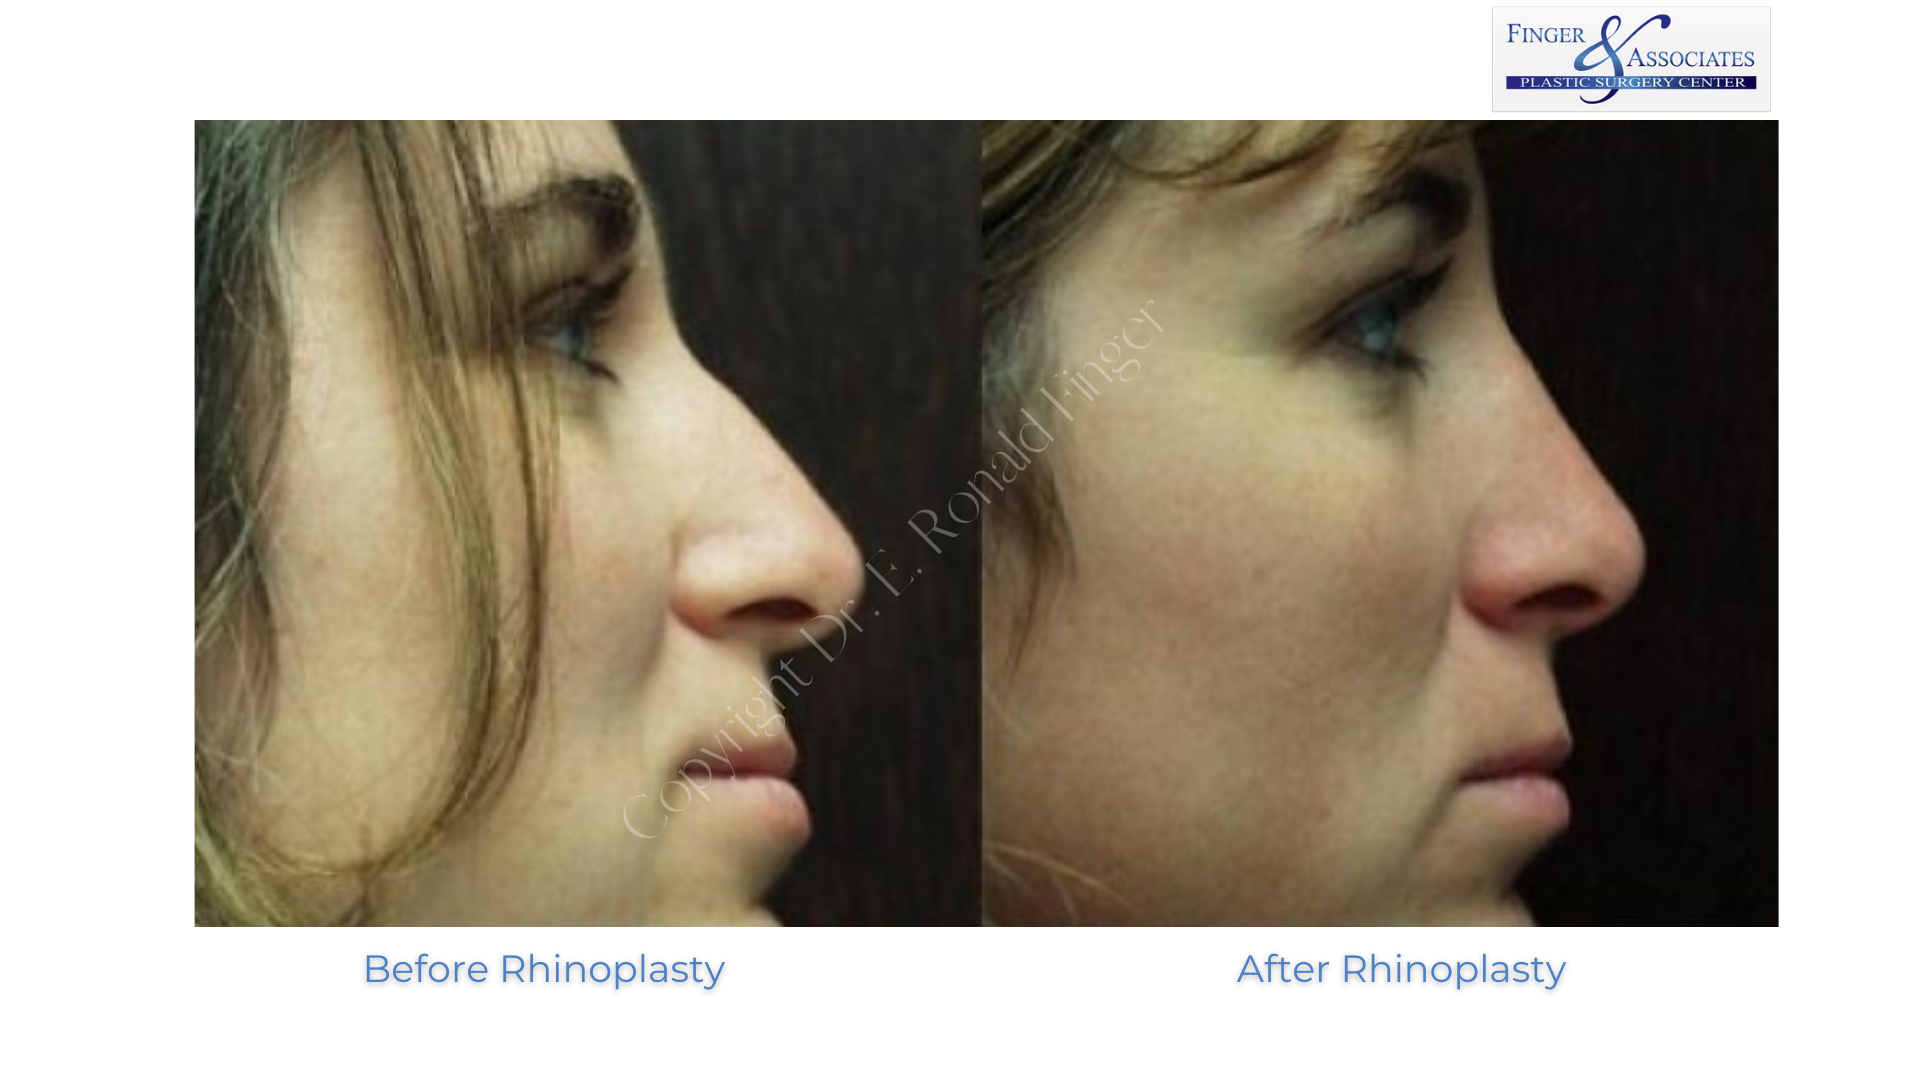 Rhinoplasty by Dr. Finger before and after